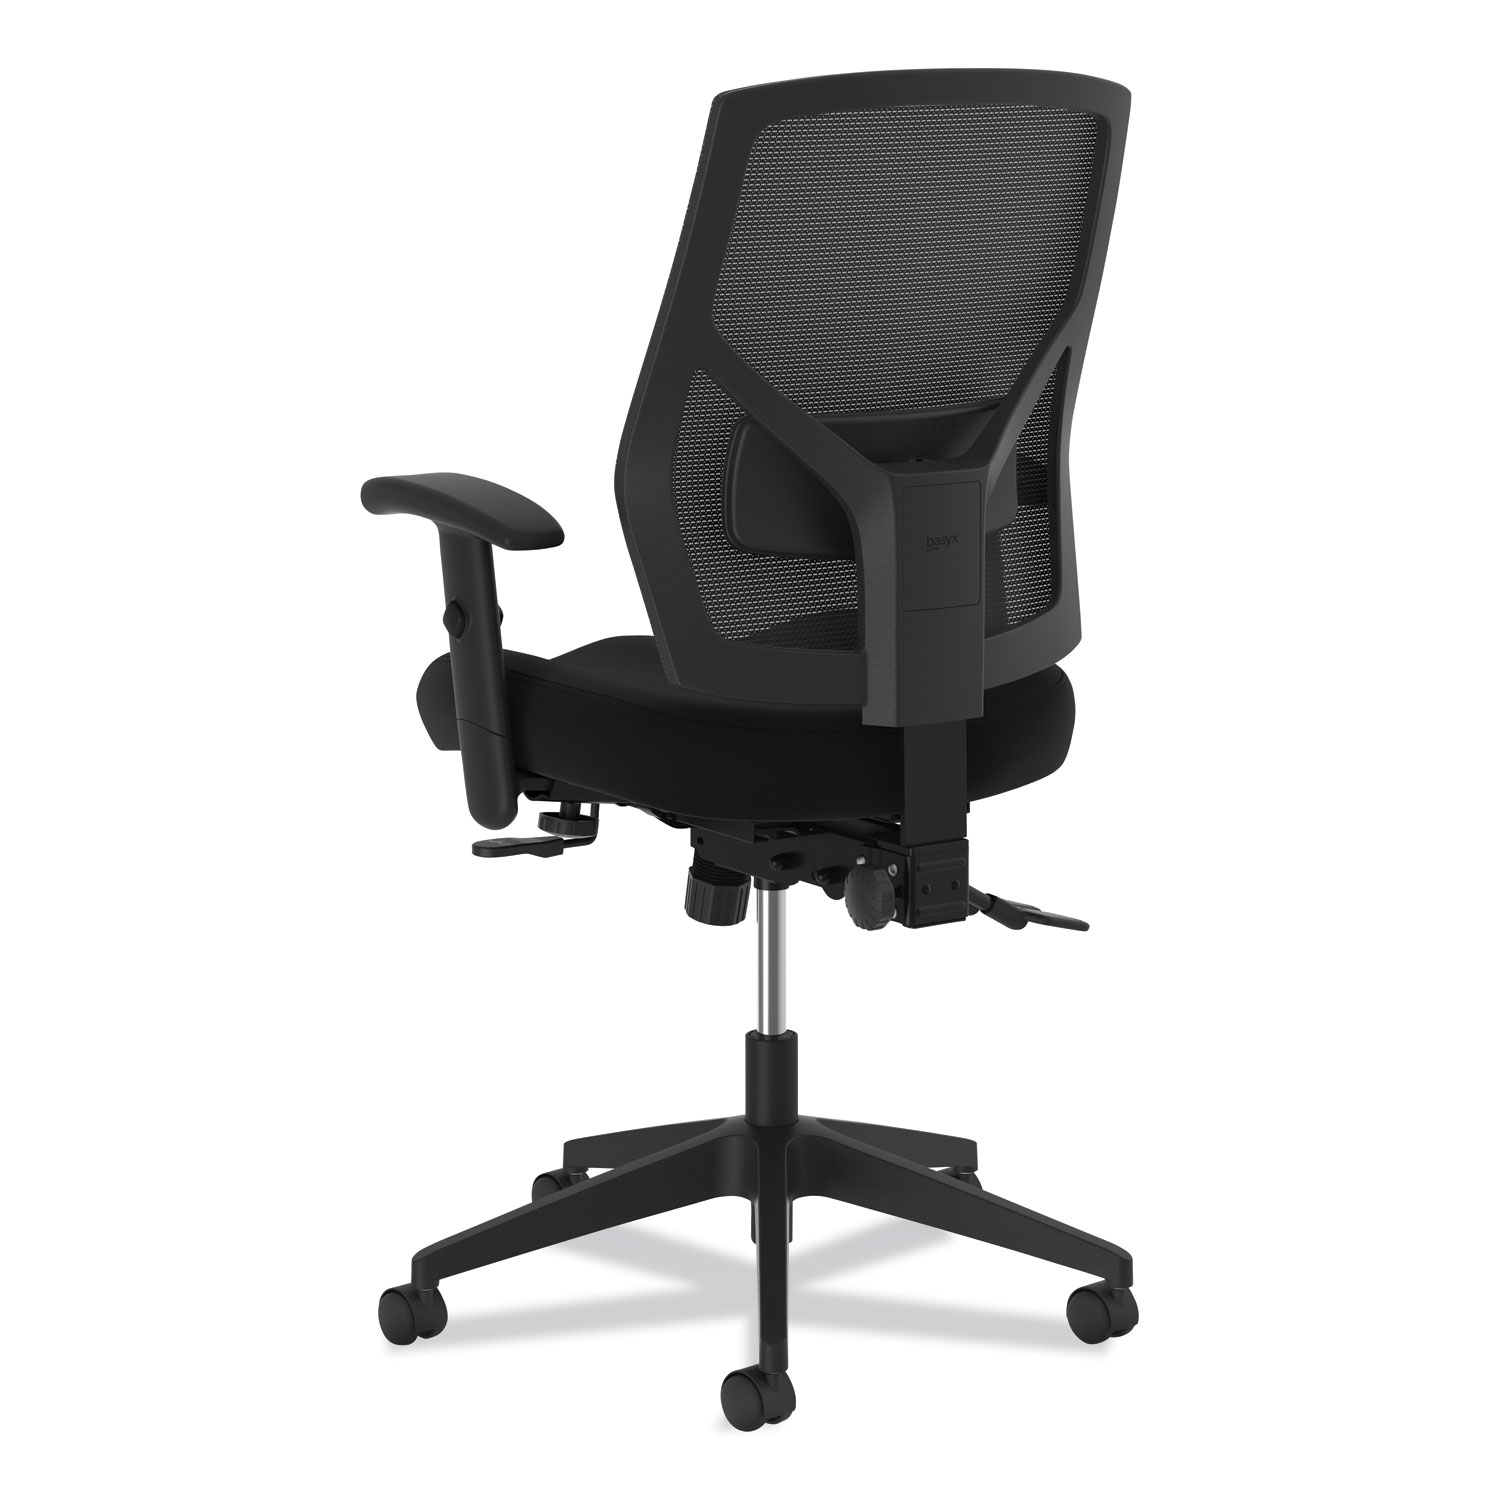 Crio High-Back Task Chair with Asynchronous Control, Supports up to 250 lbs., Black Seat/Black Back, Black Base